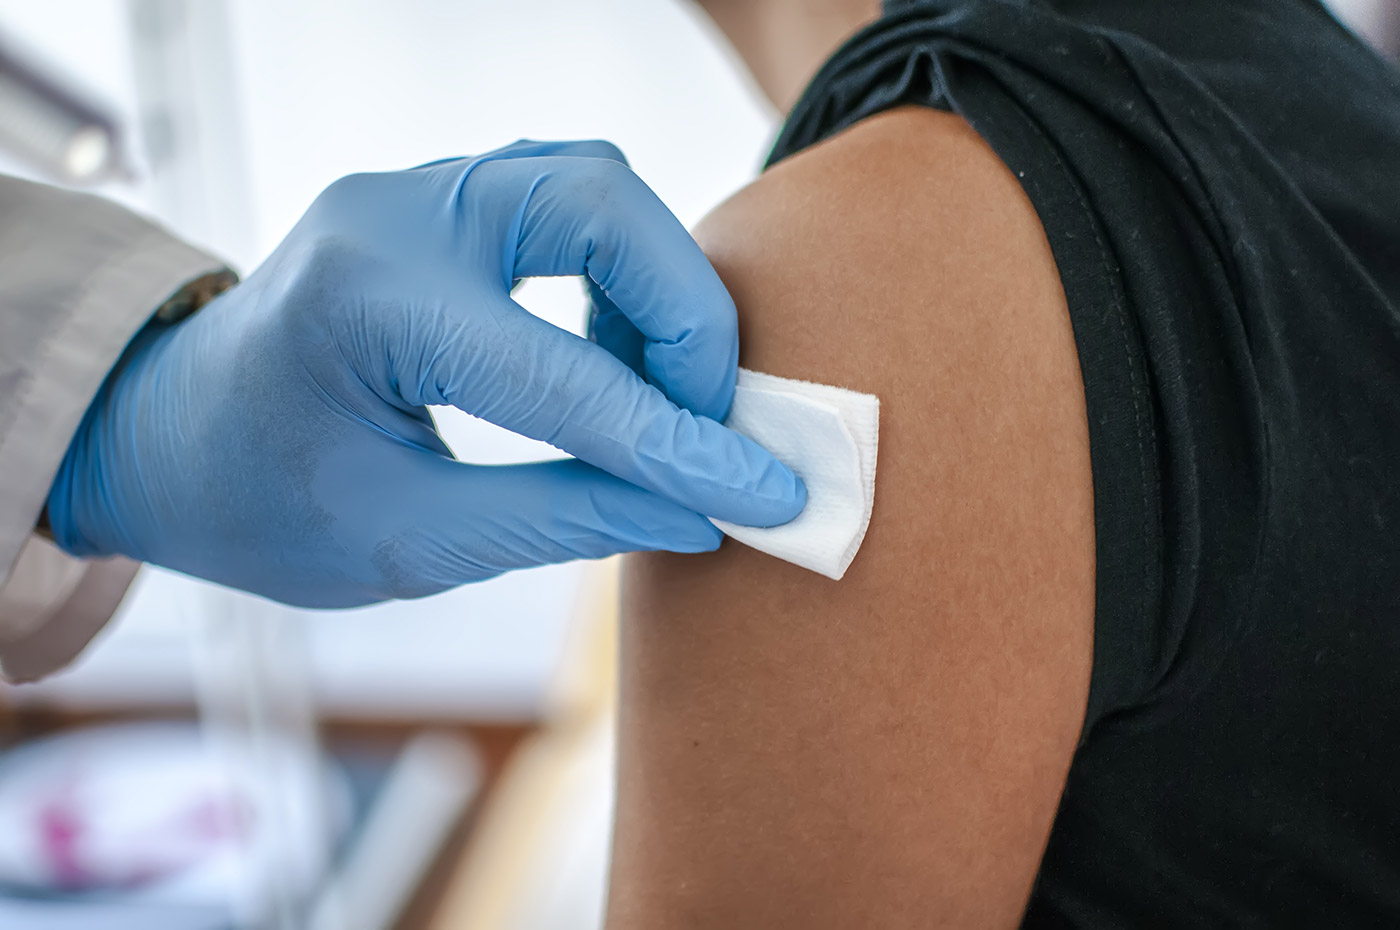 What are the new directions for mandatory Covid-19 vaccinations for Victorian workers?